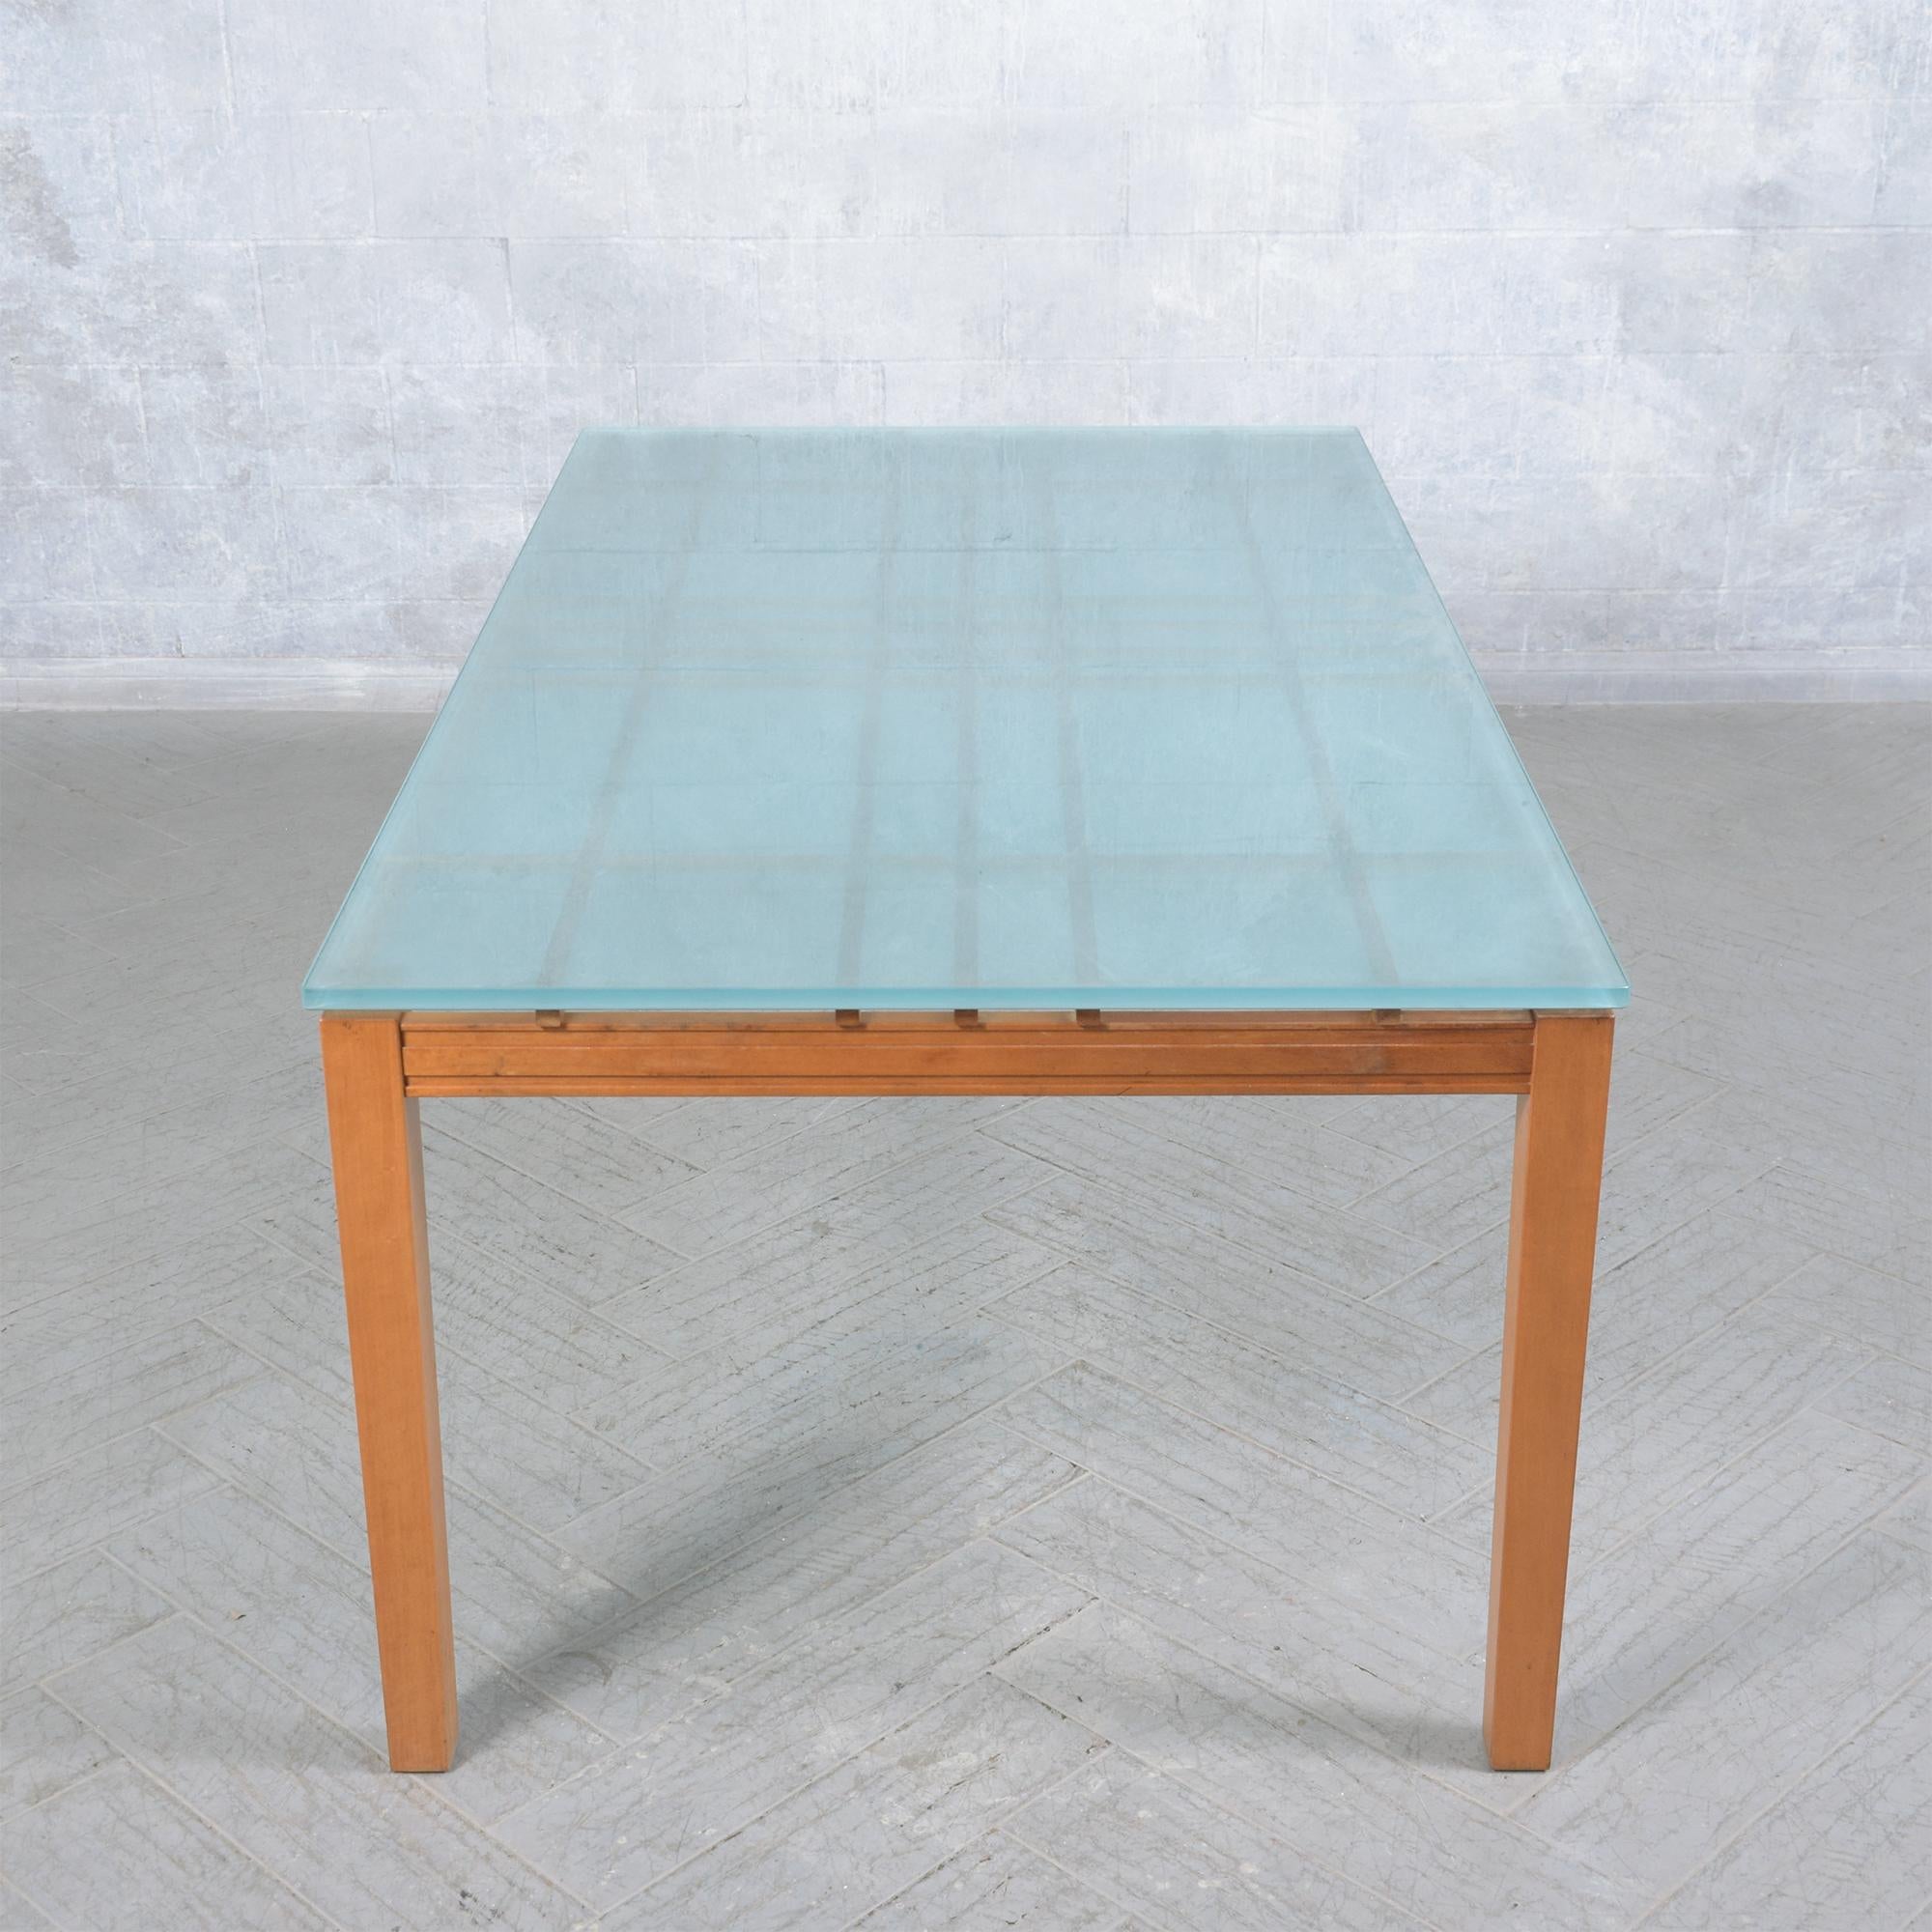 1980s Modern Maple Wood Dining Table with Frosted Glass Top For Sale 2